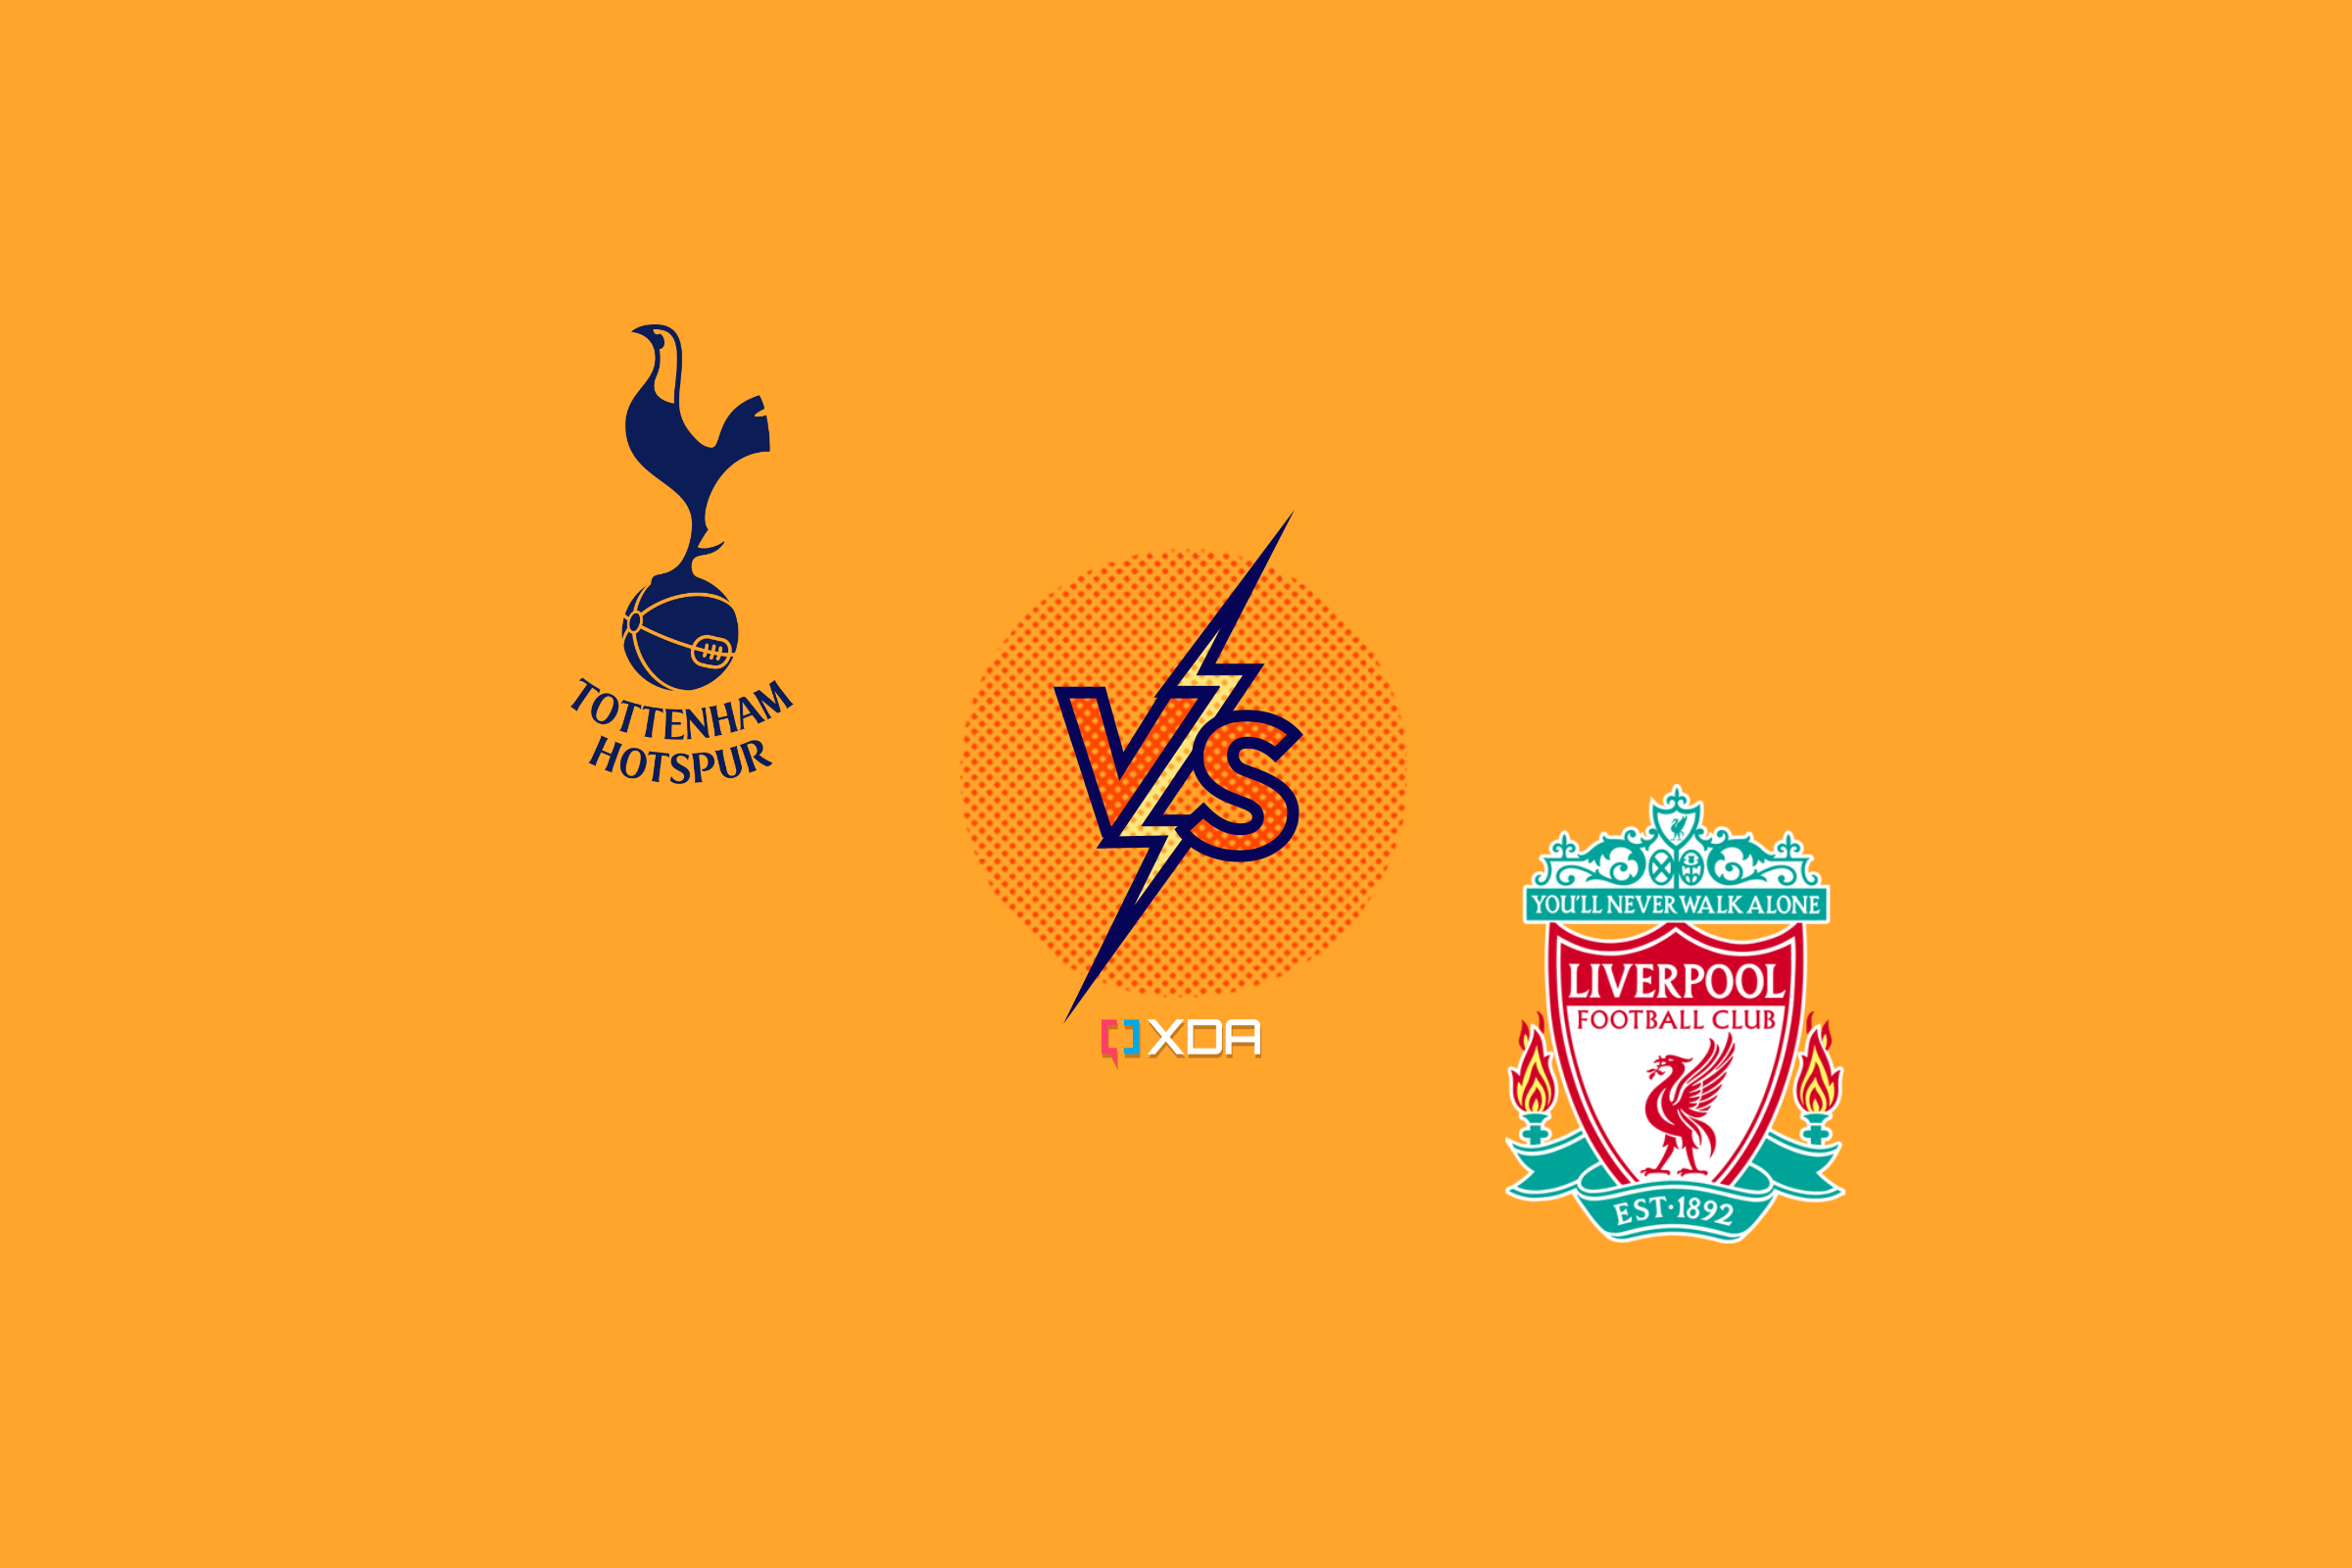 How to watch Tottenham vs Liverpool Livestream the Premier League match from anywhere